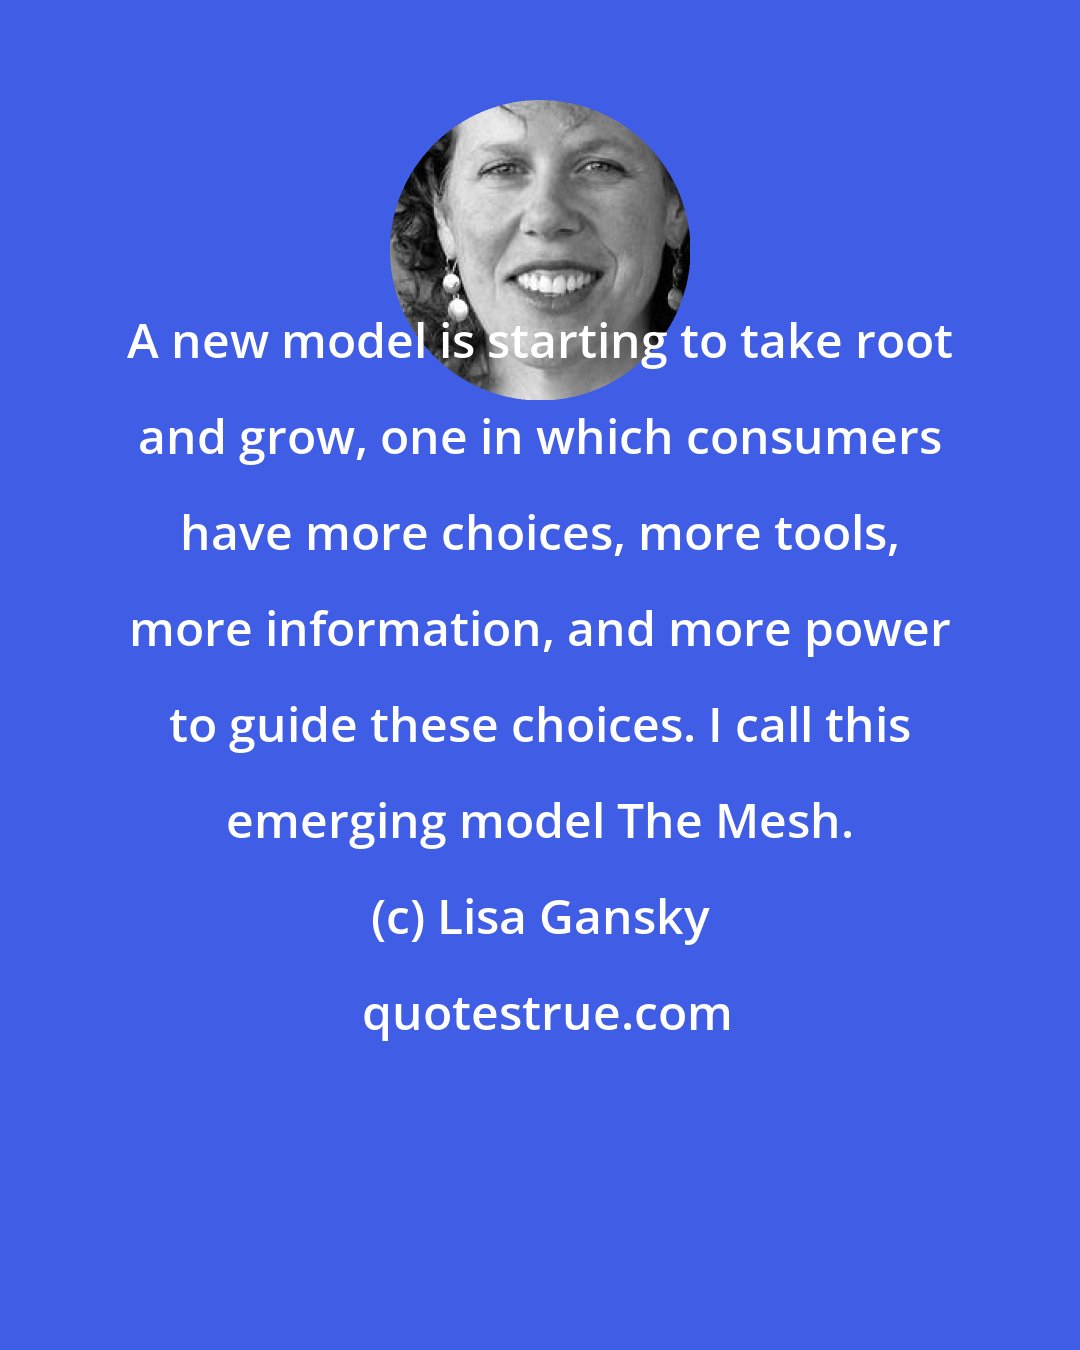 Lisa Gansky: A new model is starting to take root and grow, one in which consumers have more choices, more tools, more information, and more power to guide these choices. I call this emerging model The Mesh.